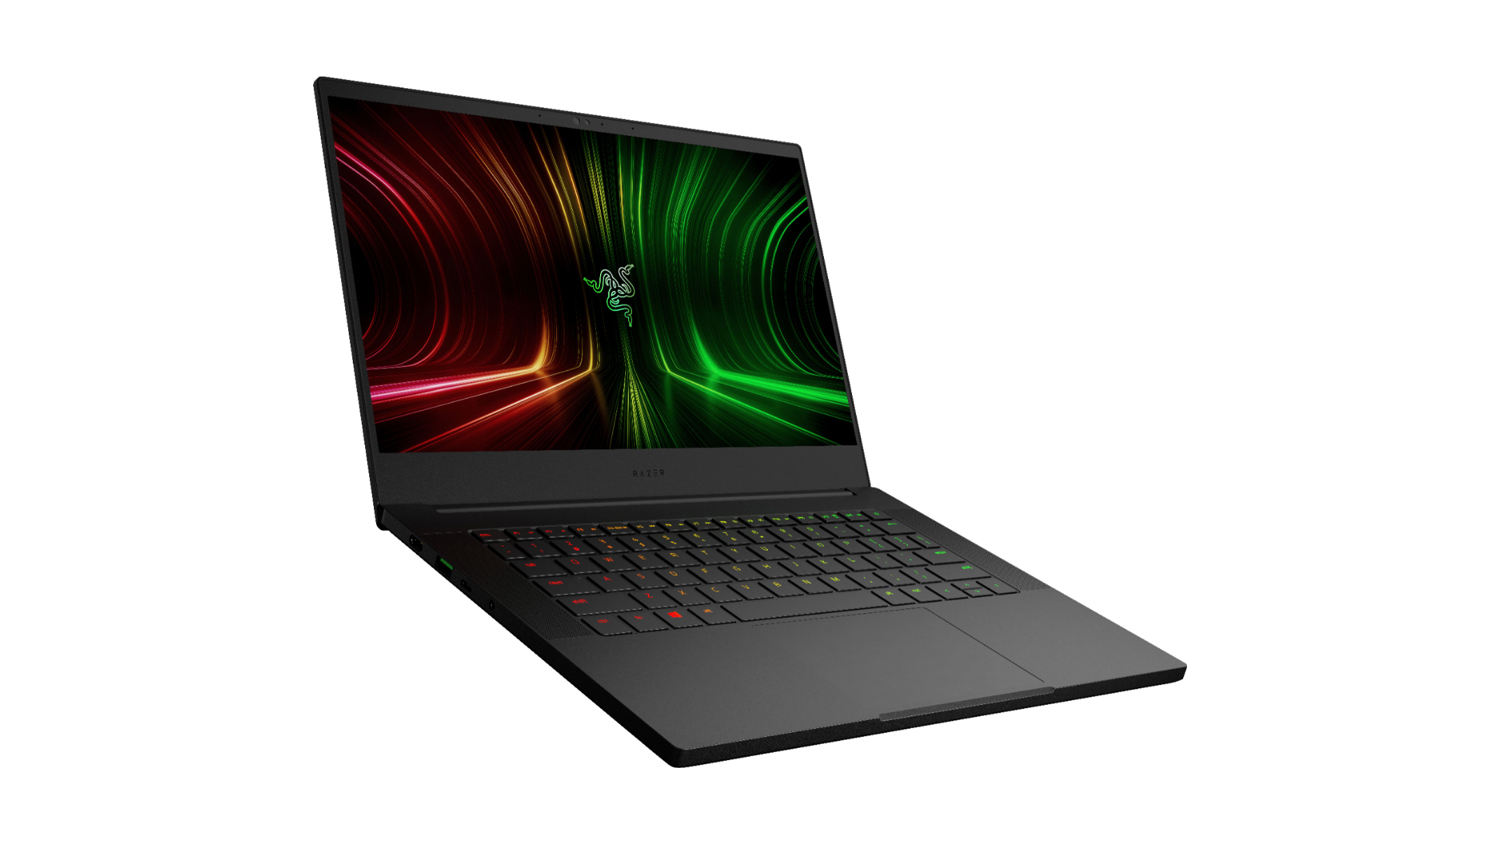 The Razer Blade 14 on a white background with its display, keyboard and trackpad visible.